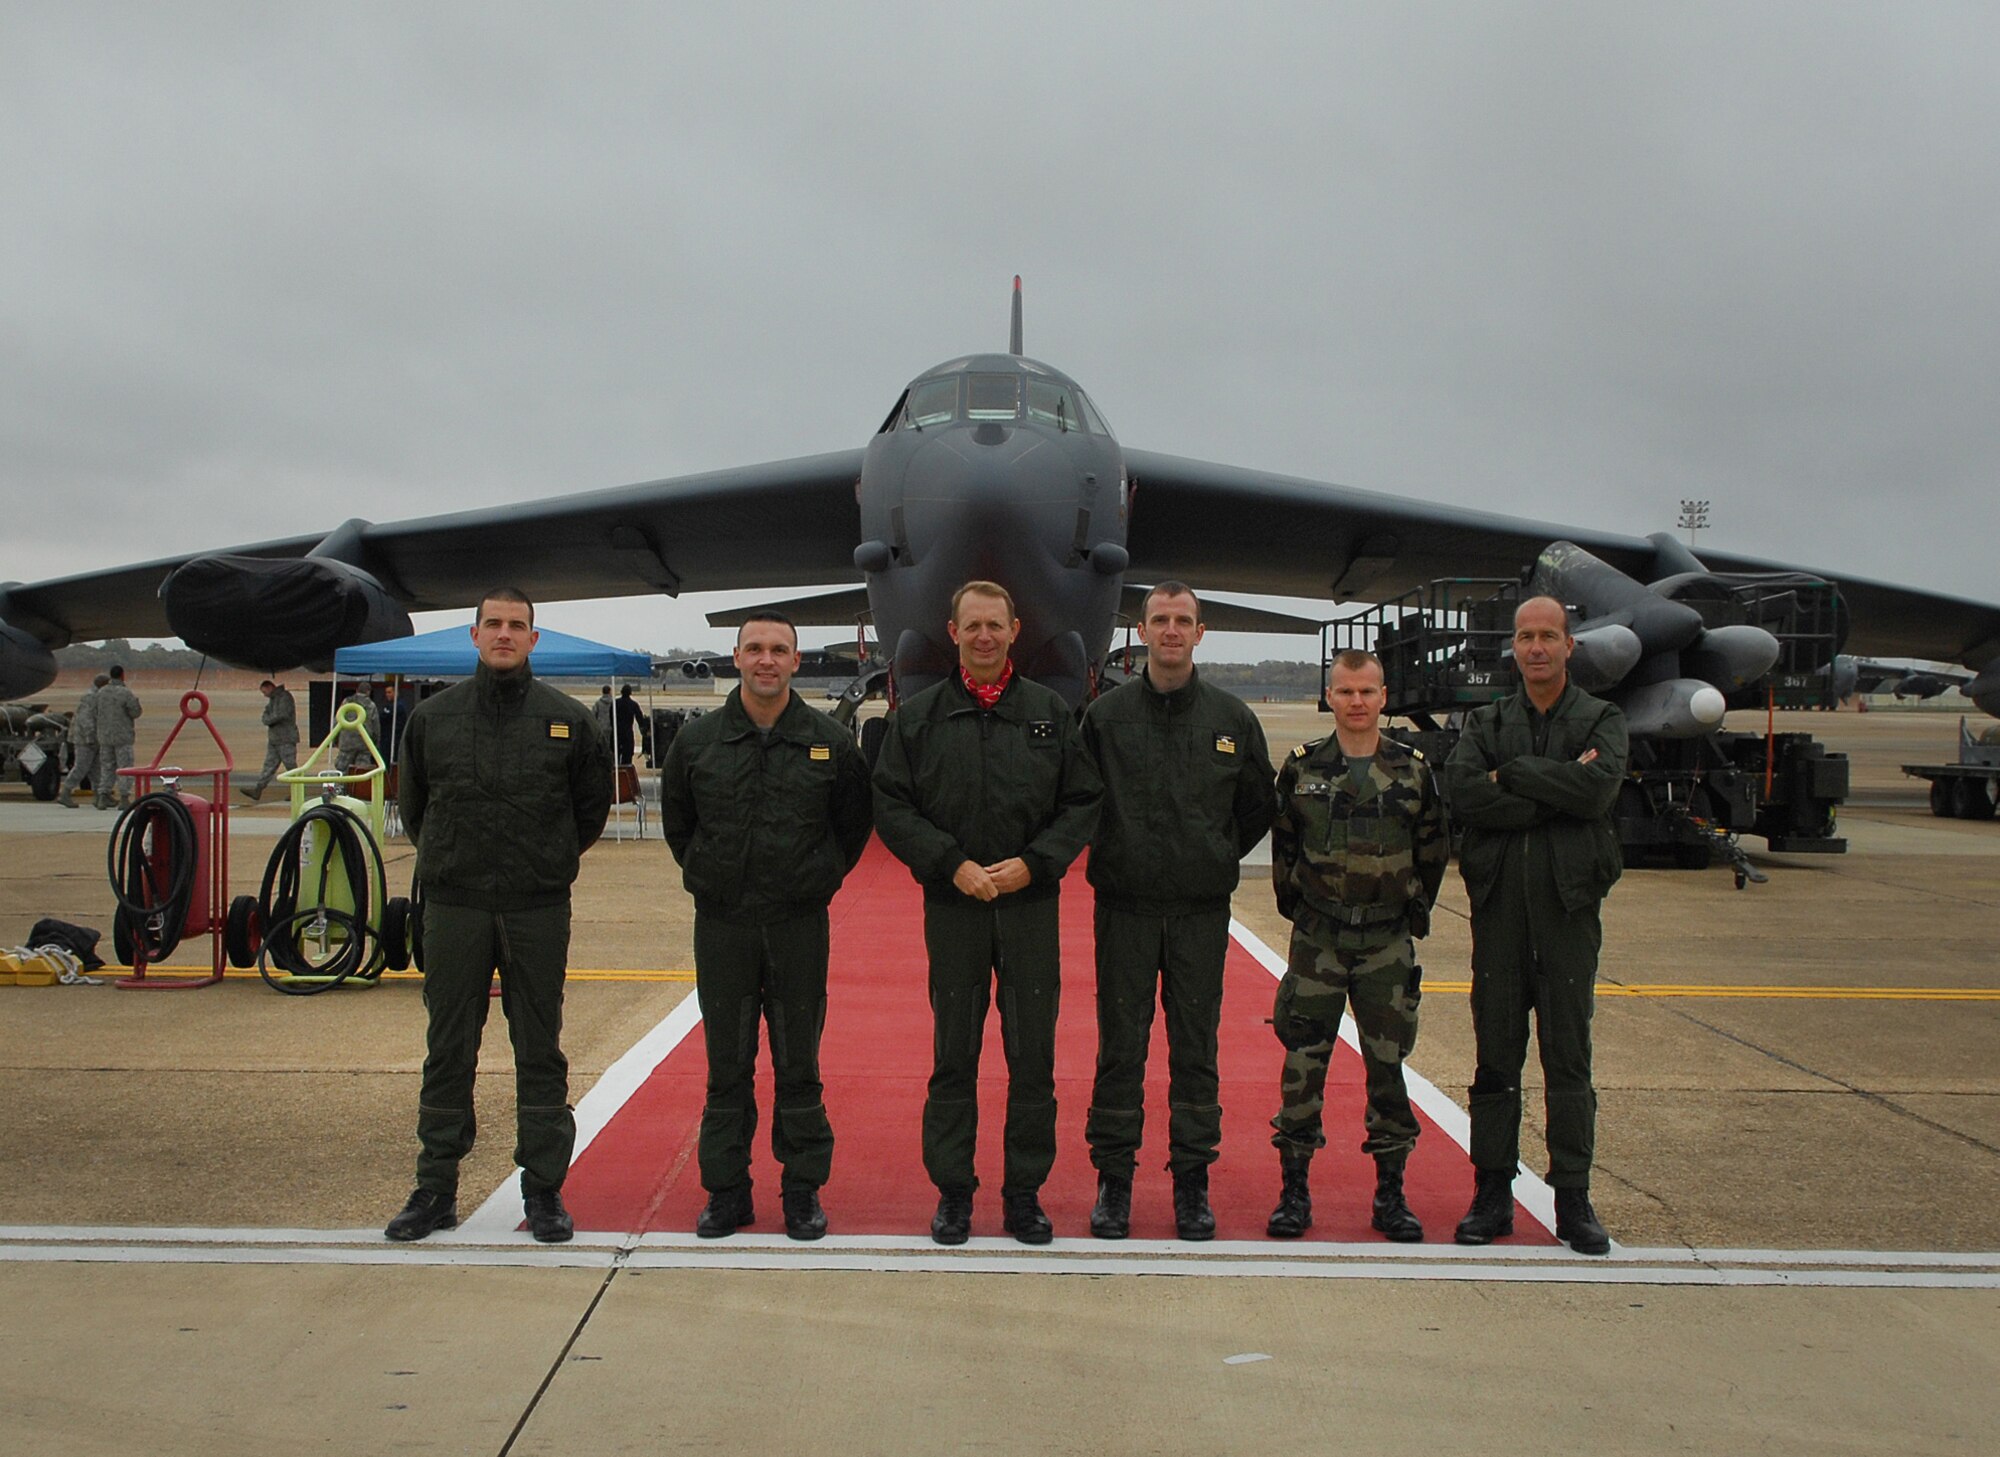 BARKSDALE AIR FORCE BASE, La. -- Lt. Gen. Paul Fouilland (center), French Strategic Air Forces commander-in-chief, and a delegation of French military officers pose in front of a B-52 bomber at Barksdale Air Force Base, La. during their visit Nov. 14-18. The visit was part of a dialogue between the two nations’ strategic air forces, intended to build on commonalities and strengthen ties between the nations’ respective deterrence forces. (U.S. Air Force photo/Master Sgt. Corey A. Clements)